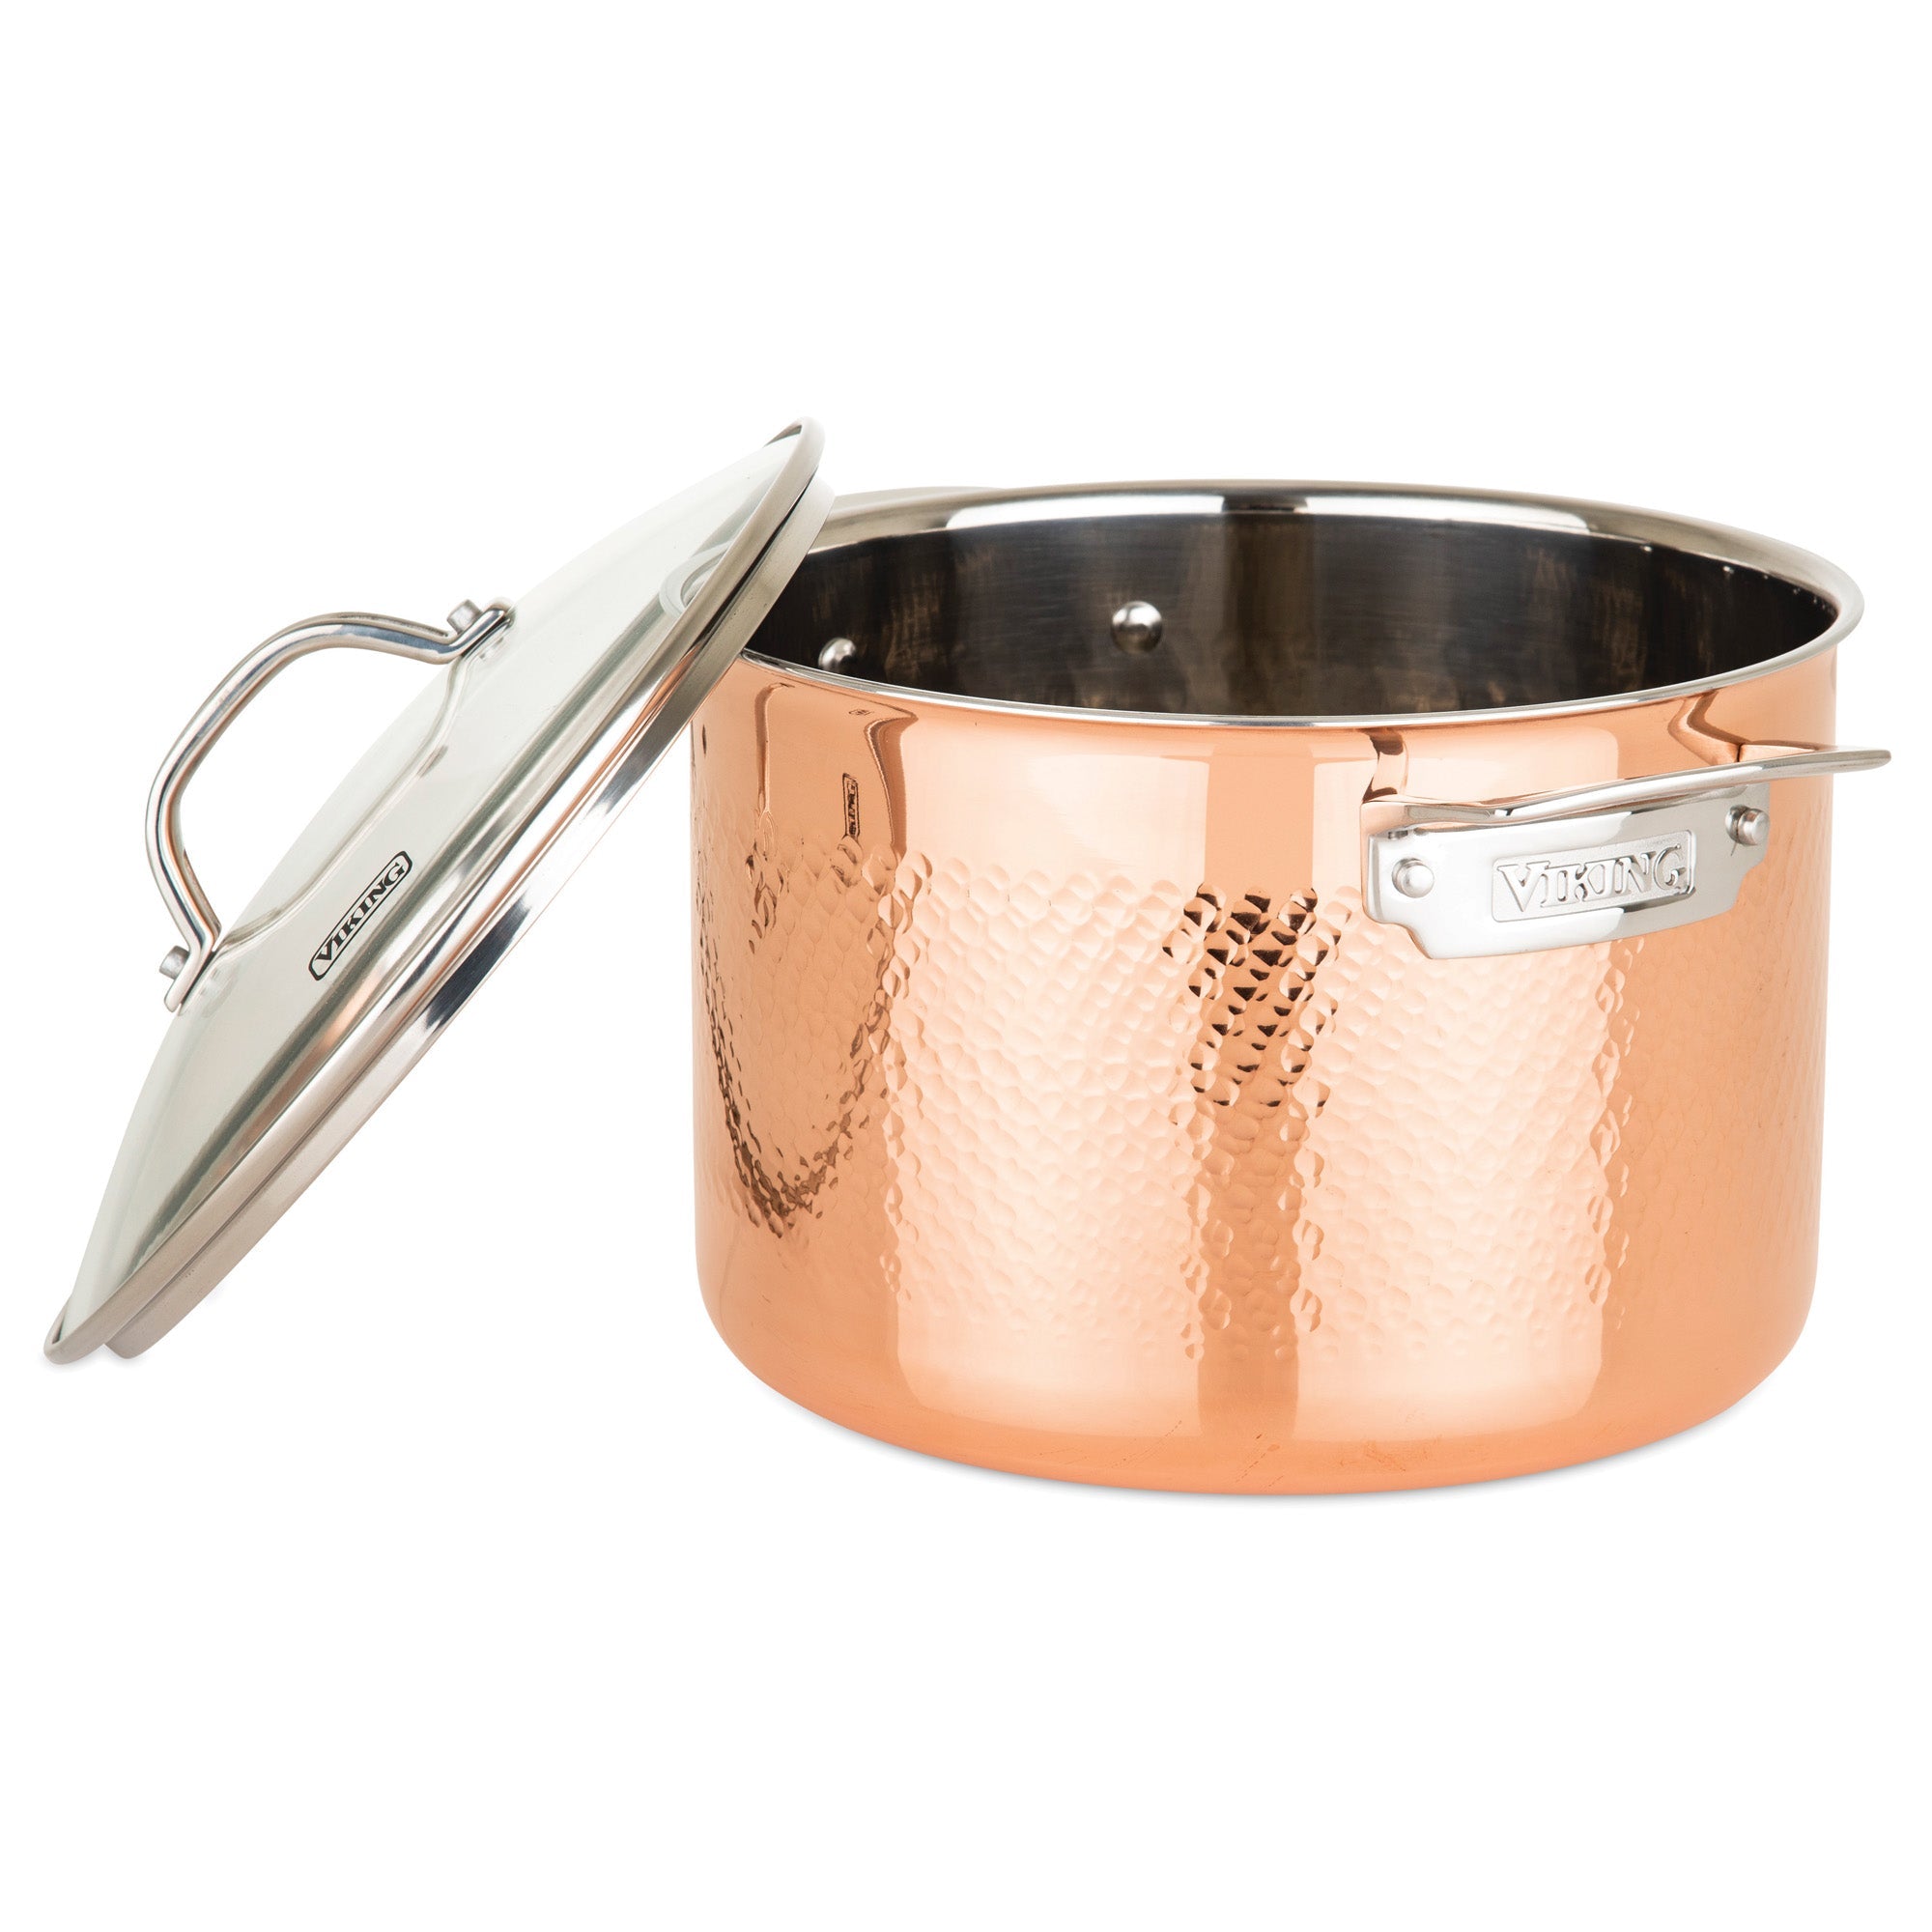 Viking 3-Ply Hammered Copper Clad 10-Piece Cookware Set with Glass Lids